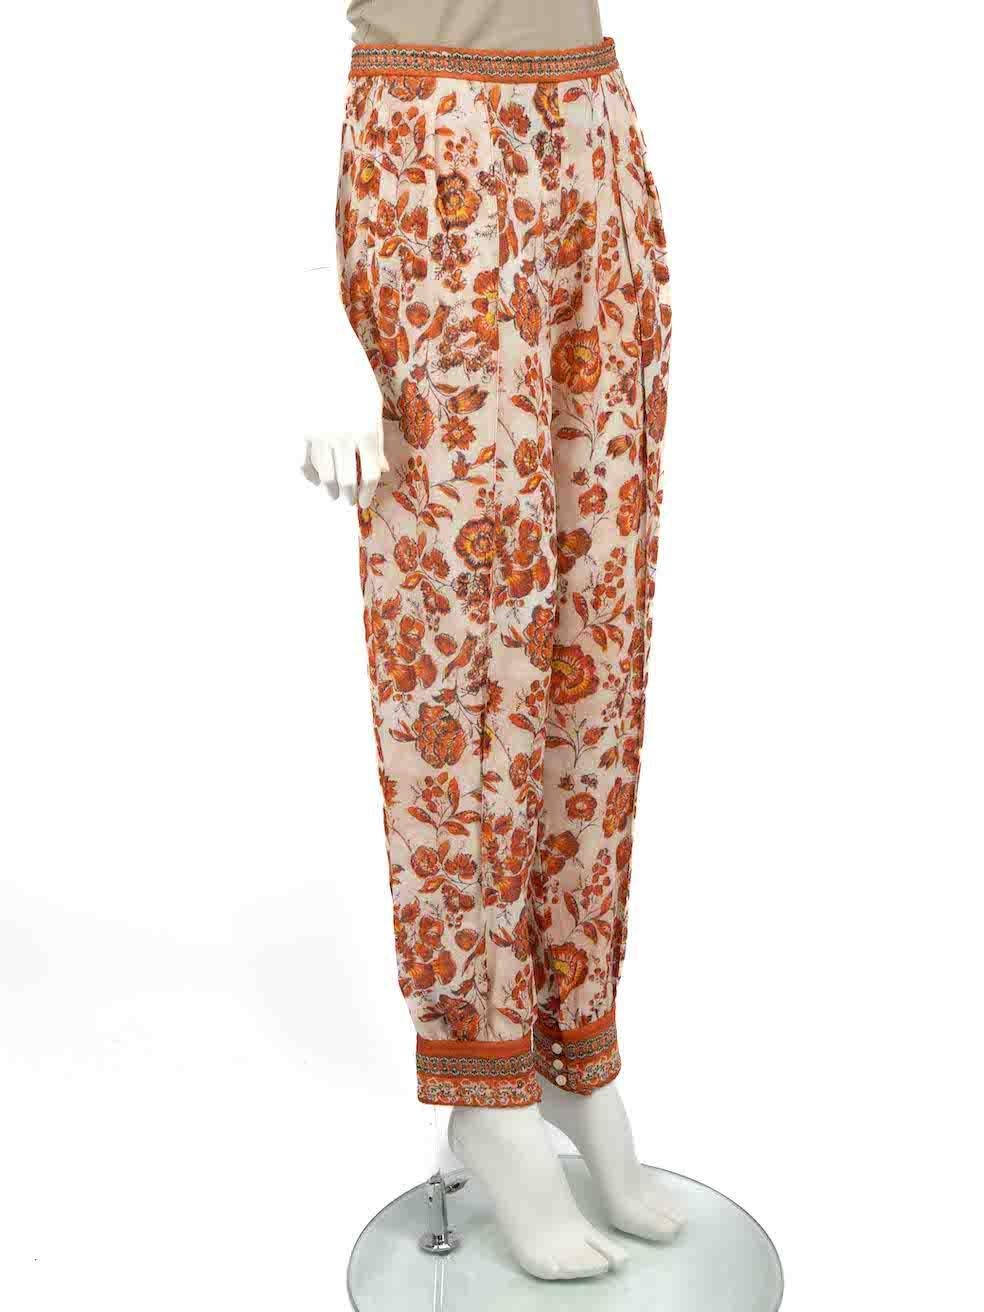 CONDITION is Very good. Hardly any visible wear to trousers is evident on this used Loro Piana designer resale item.
 
 
 
 Details
 
 
 Orange
 
 Silk
 
 Trousers
 
 Floral print
 
 Tapered leg
 
 High rise
 
 Side zip and button fastening
 
 
 
 
